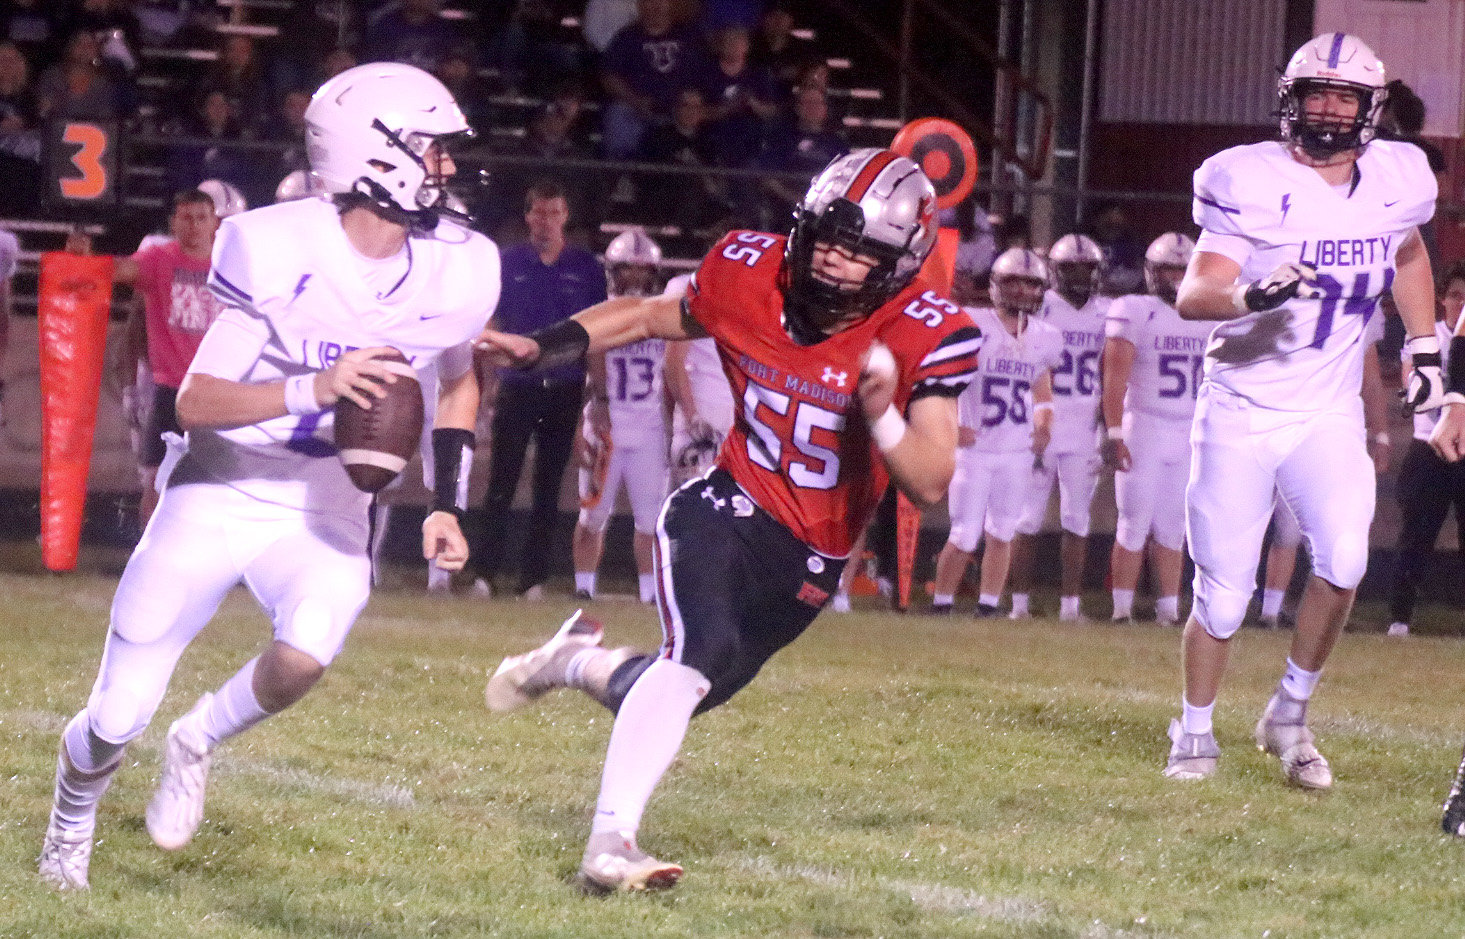 Fort Madison's Tanner Settles (55) chases down Iowa City Liberty quarterback Tye Hughes in the first period. The Bloodhounds suffered their first loss of the year 24-16 to move to 6-1. Photo by Chuck Vandenberg/PCC